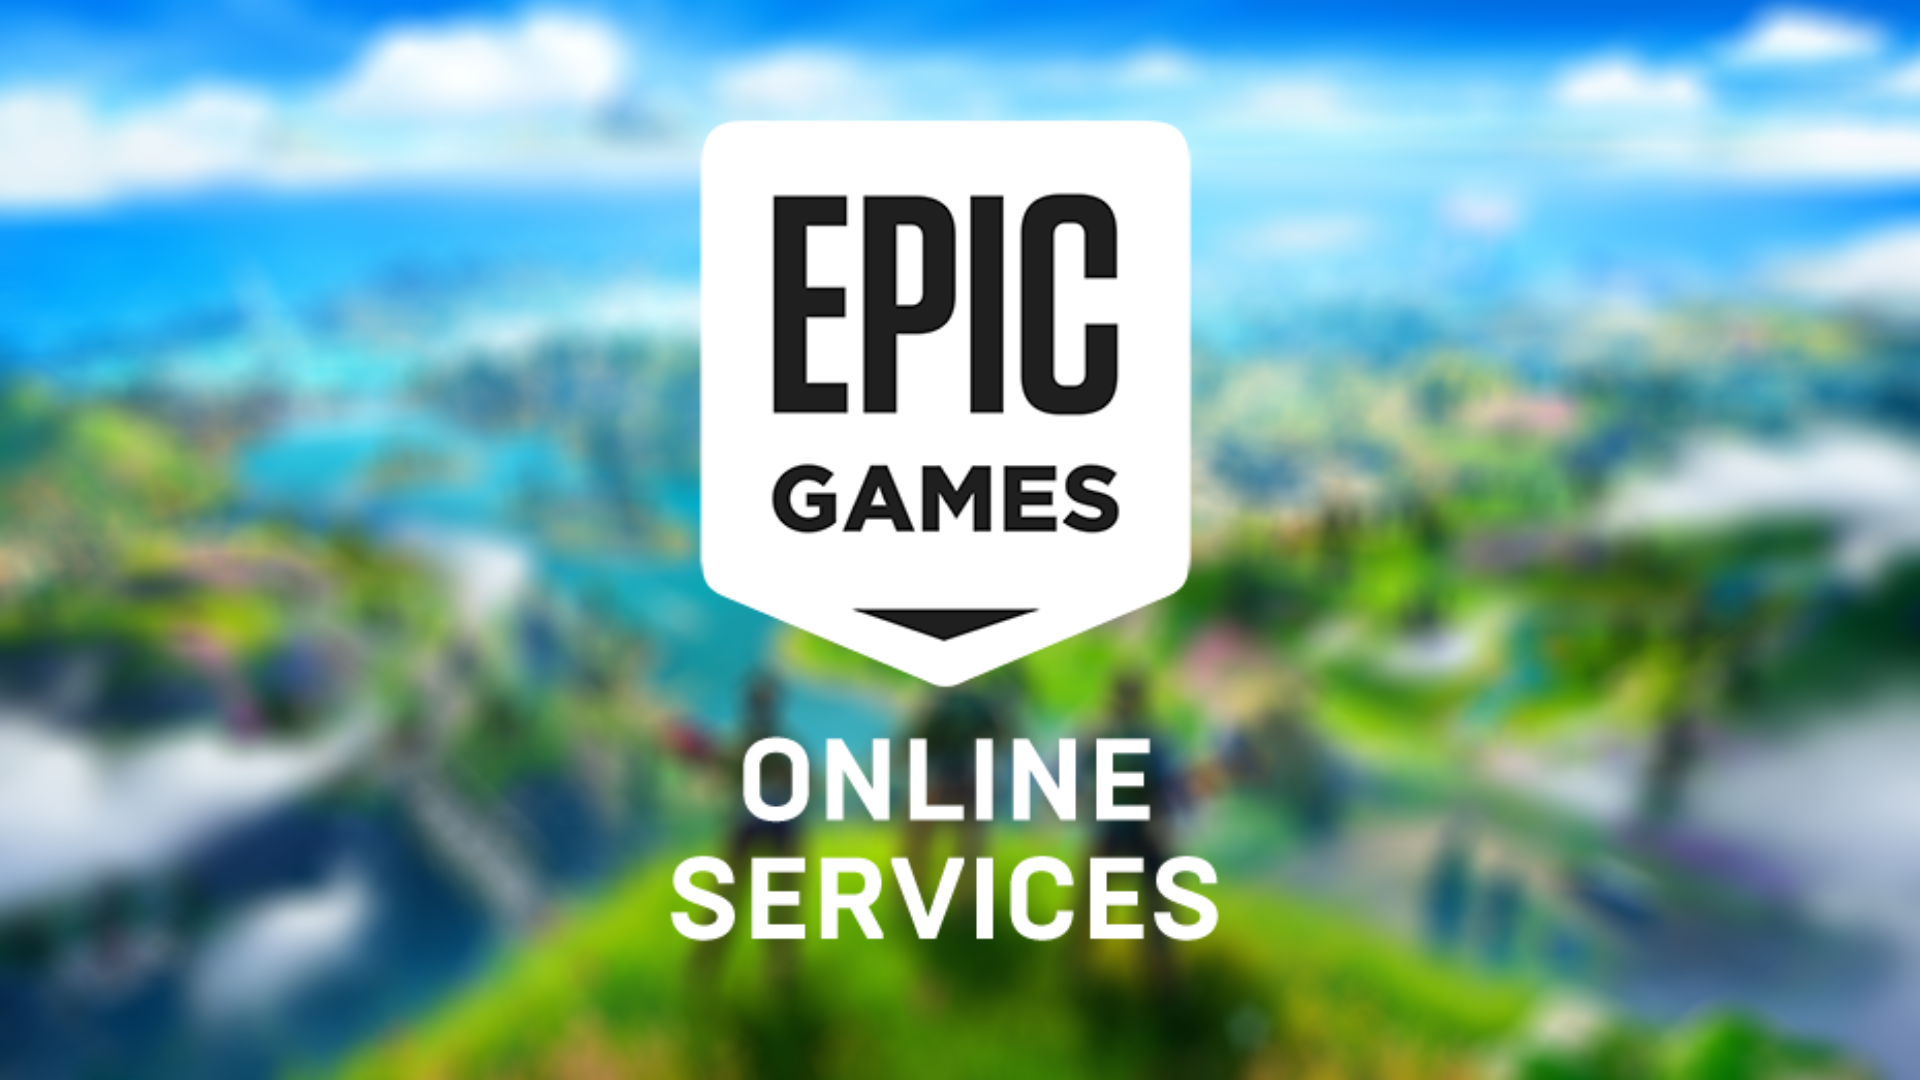 Epic games live chat support